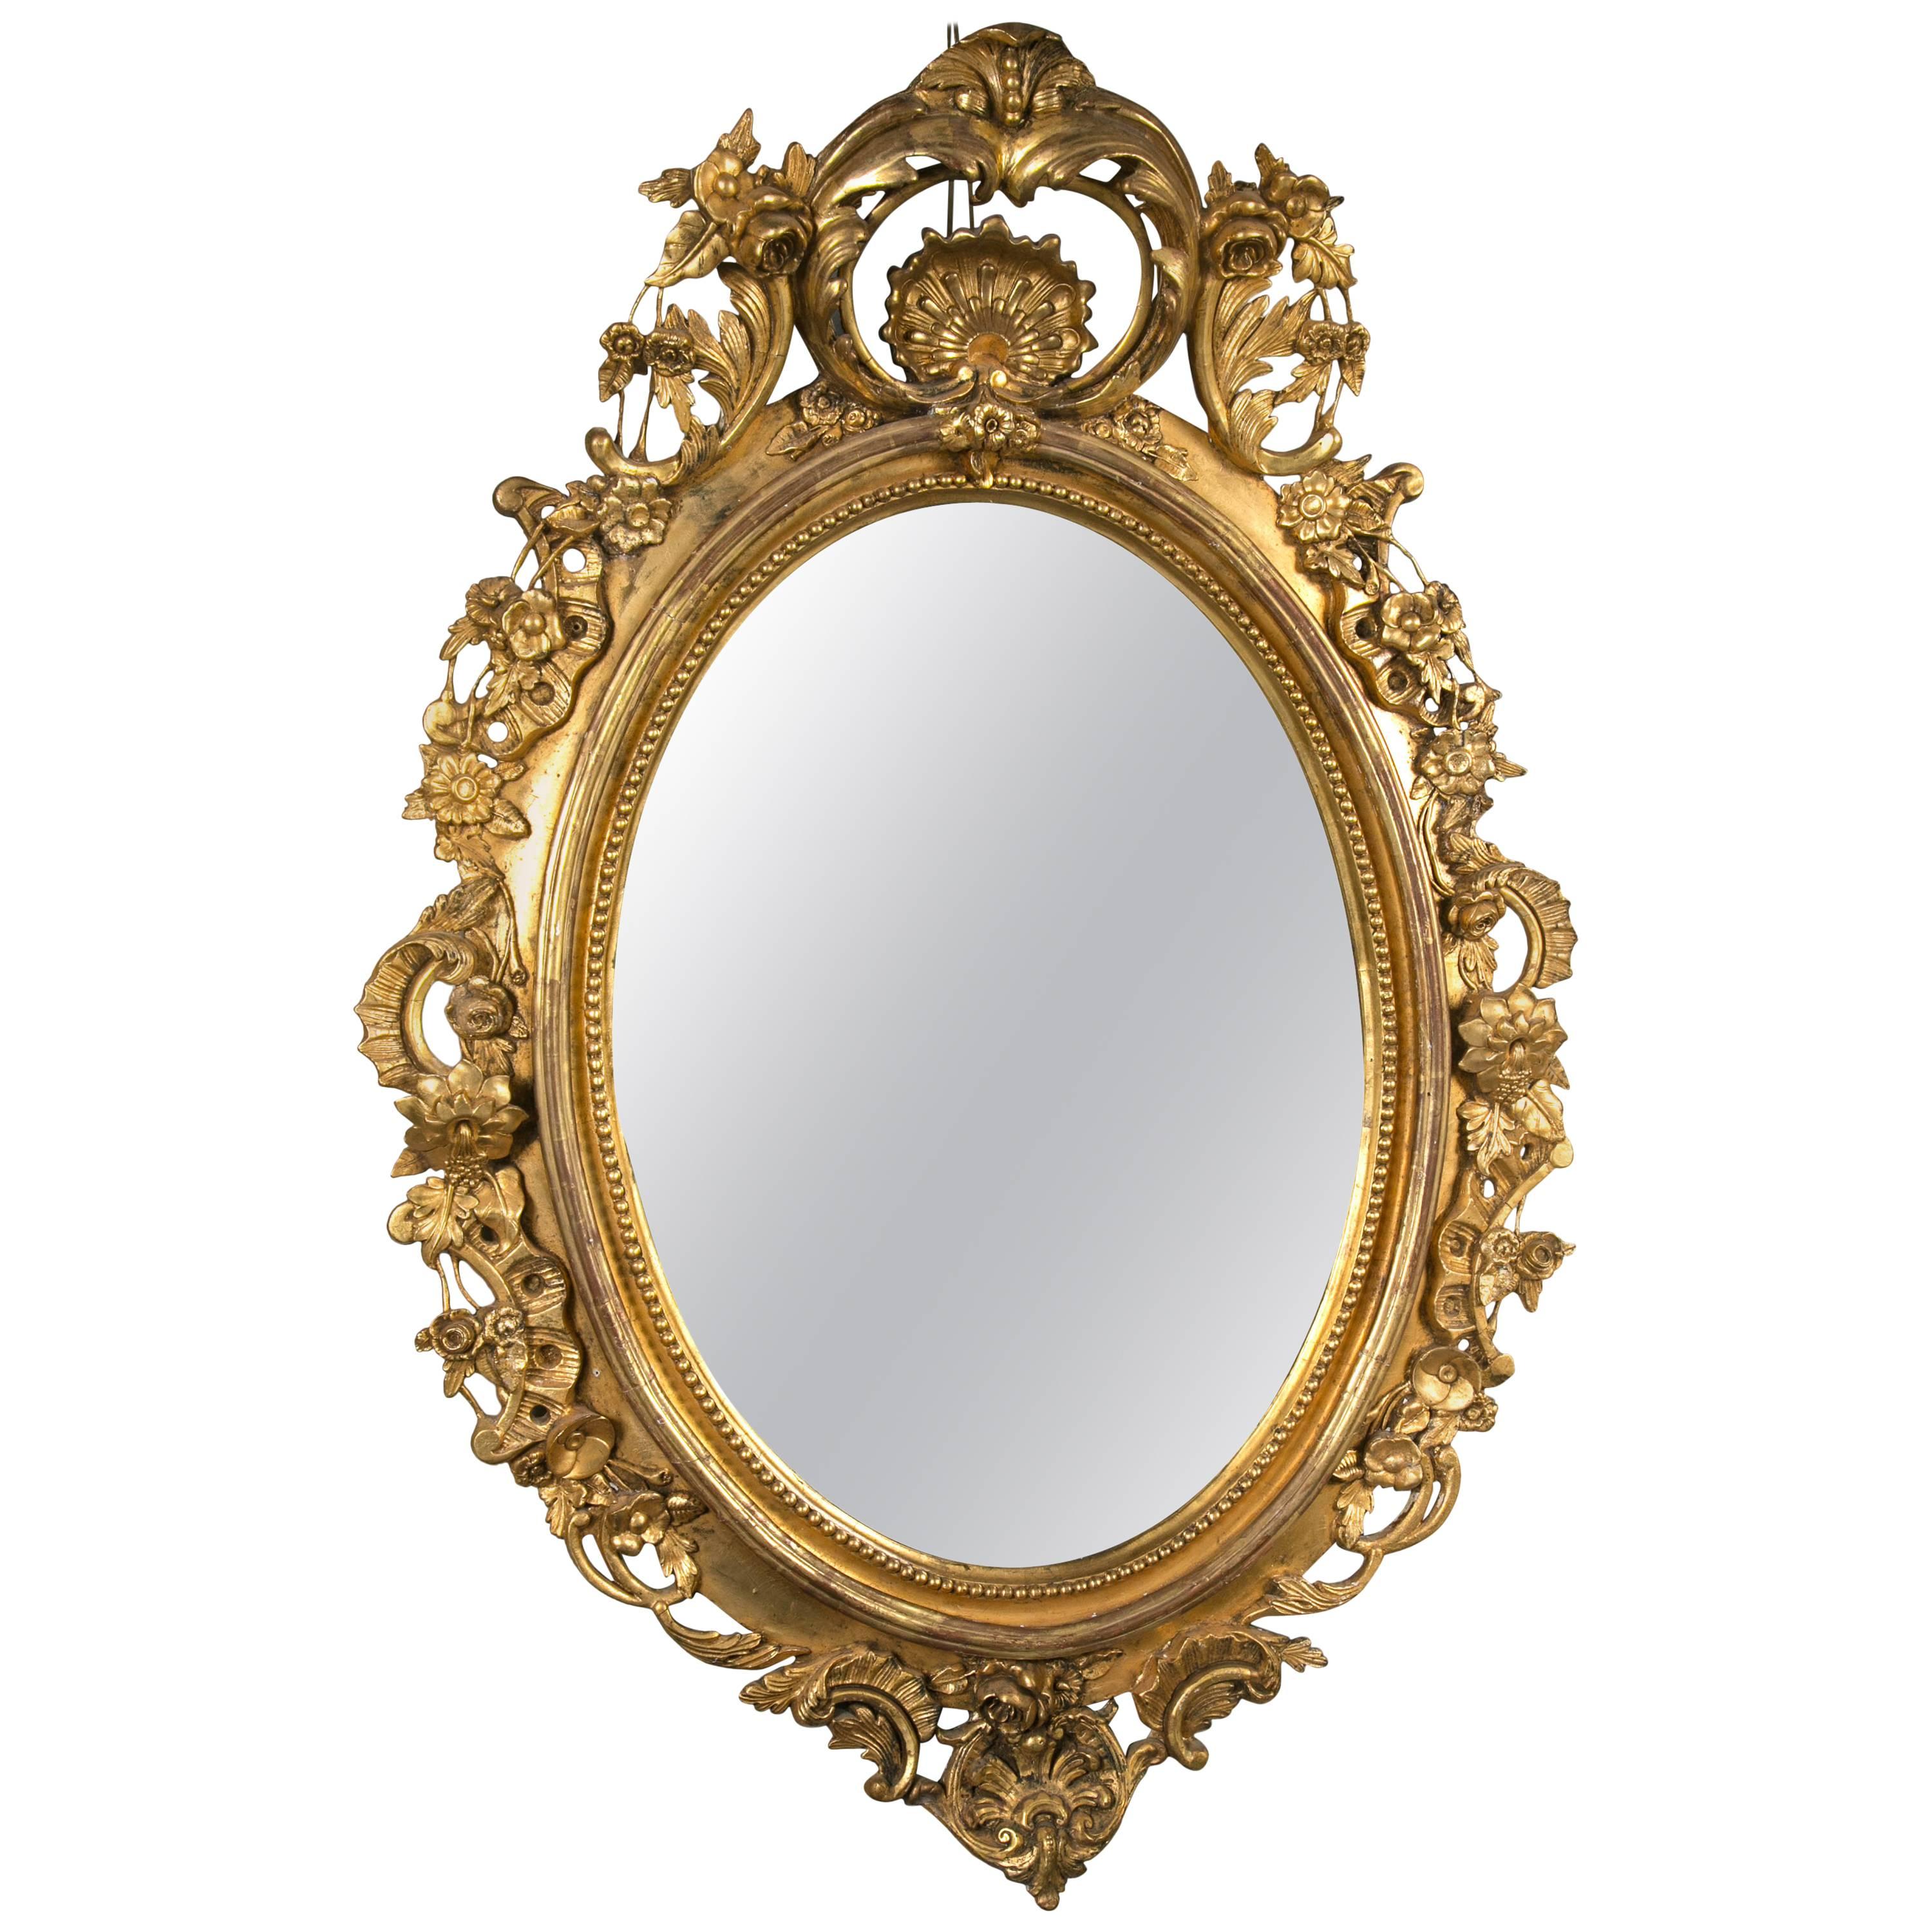 Monumental Antique Louis XV Style Wood and Gilt Gesso Mirror